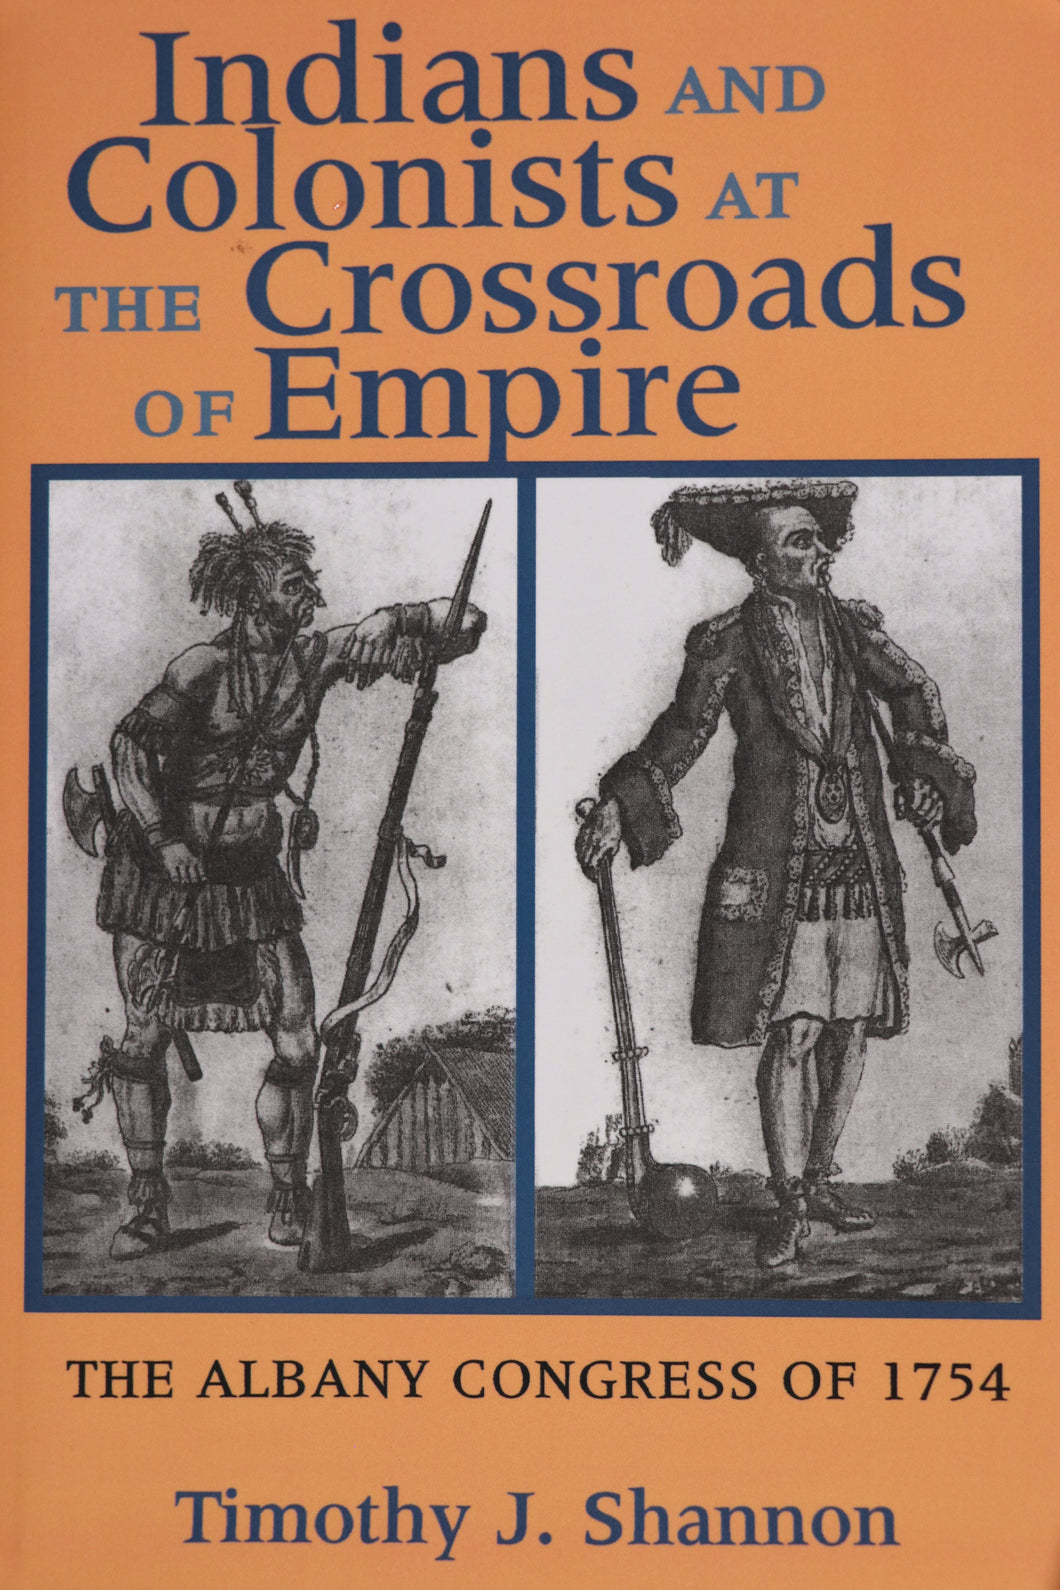 Indians and Colonists at the Crossroads of Empire: The Albany Congress of 1754